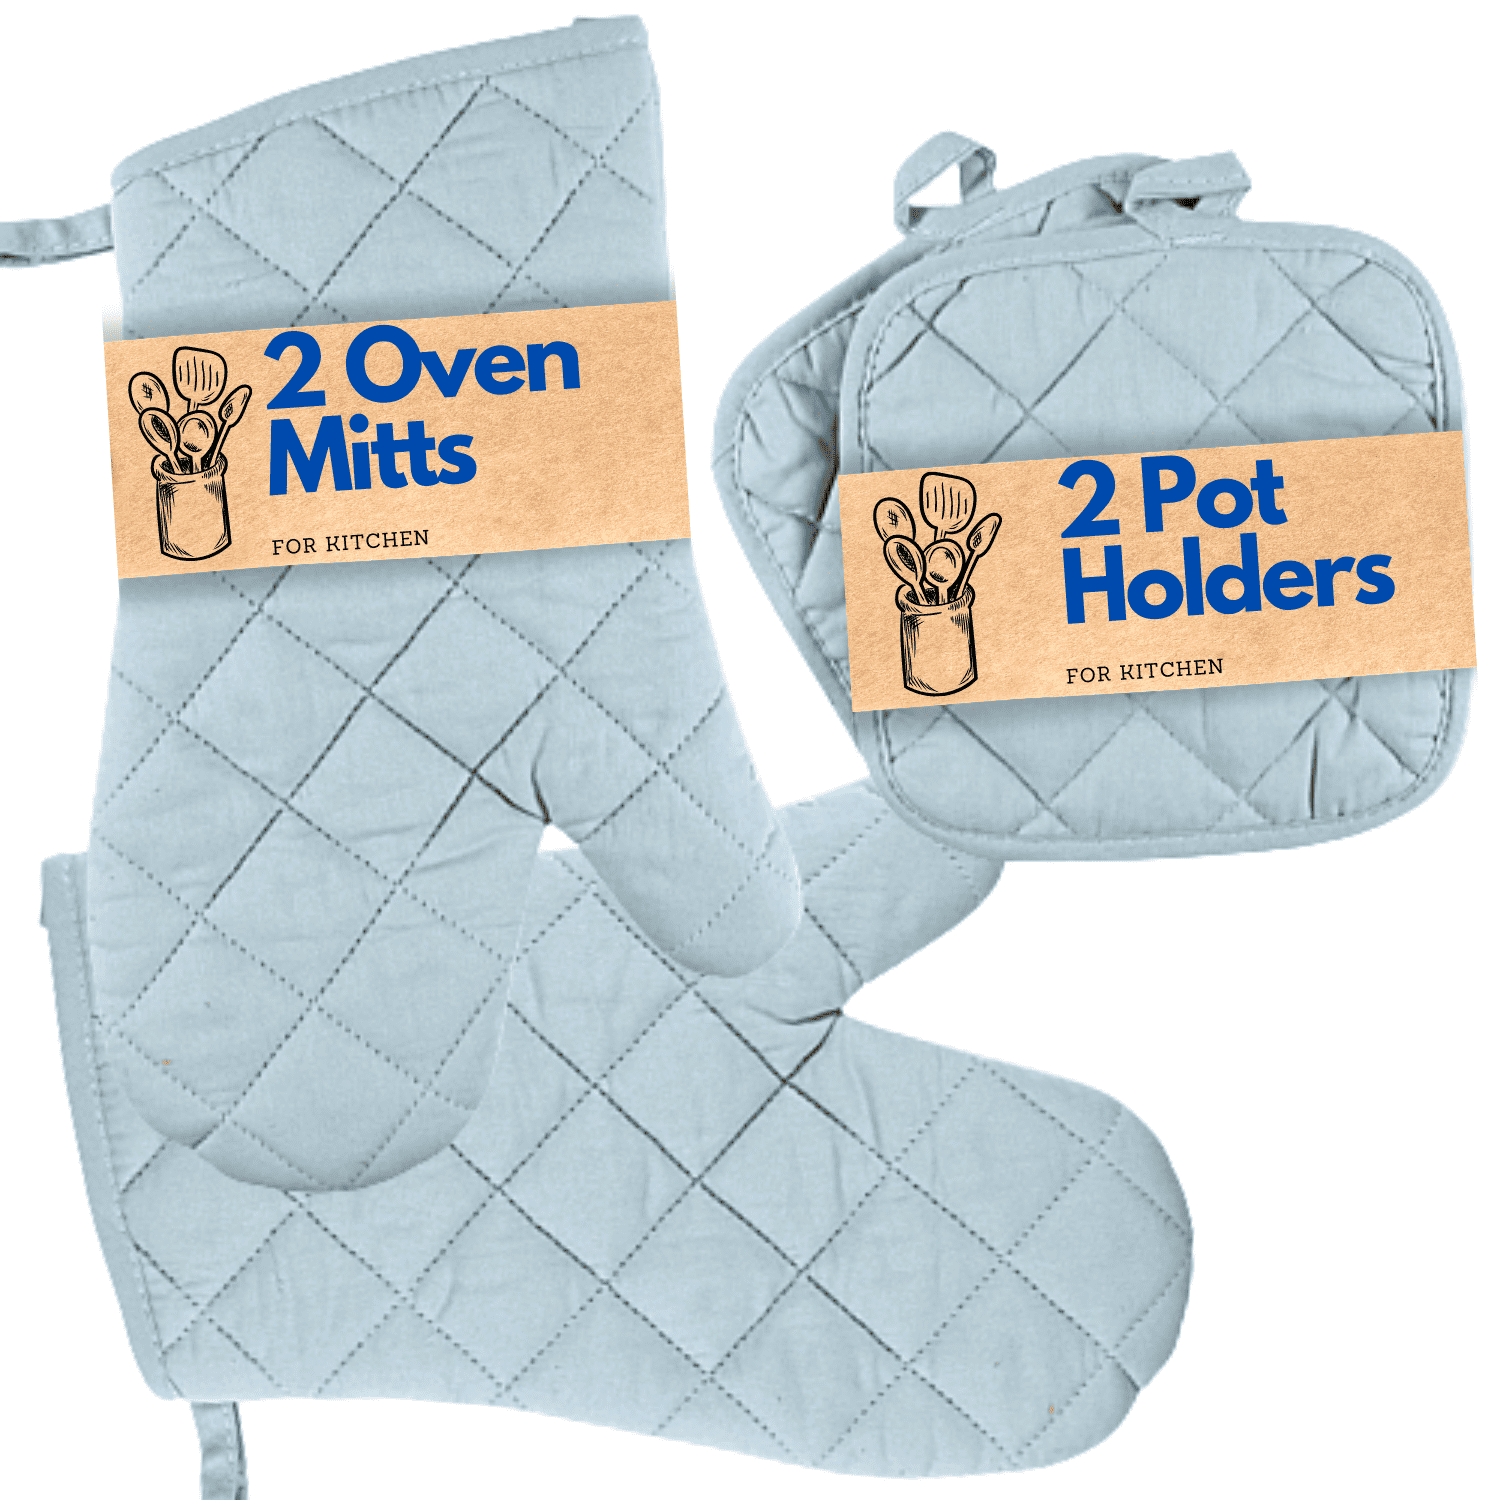  Piduules Set of 4 Oven Mitts and Pot Holders, 482 F